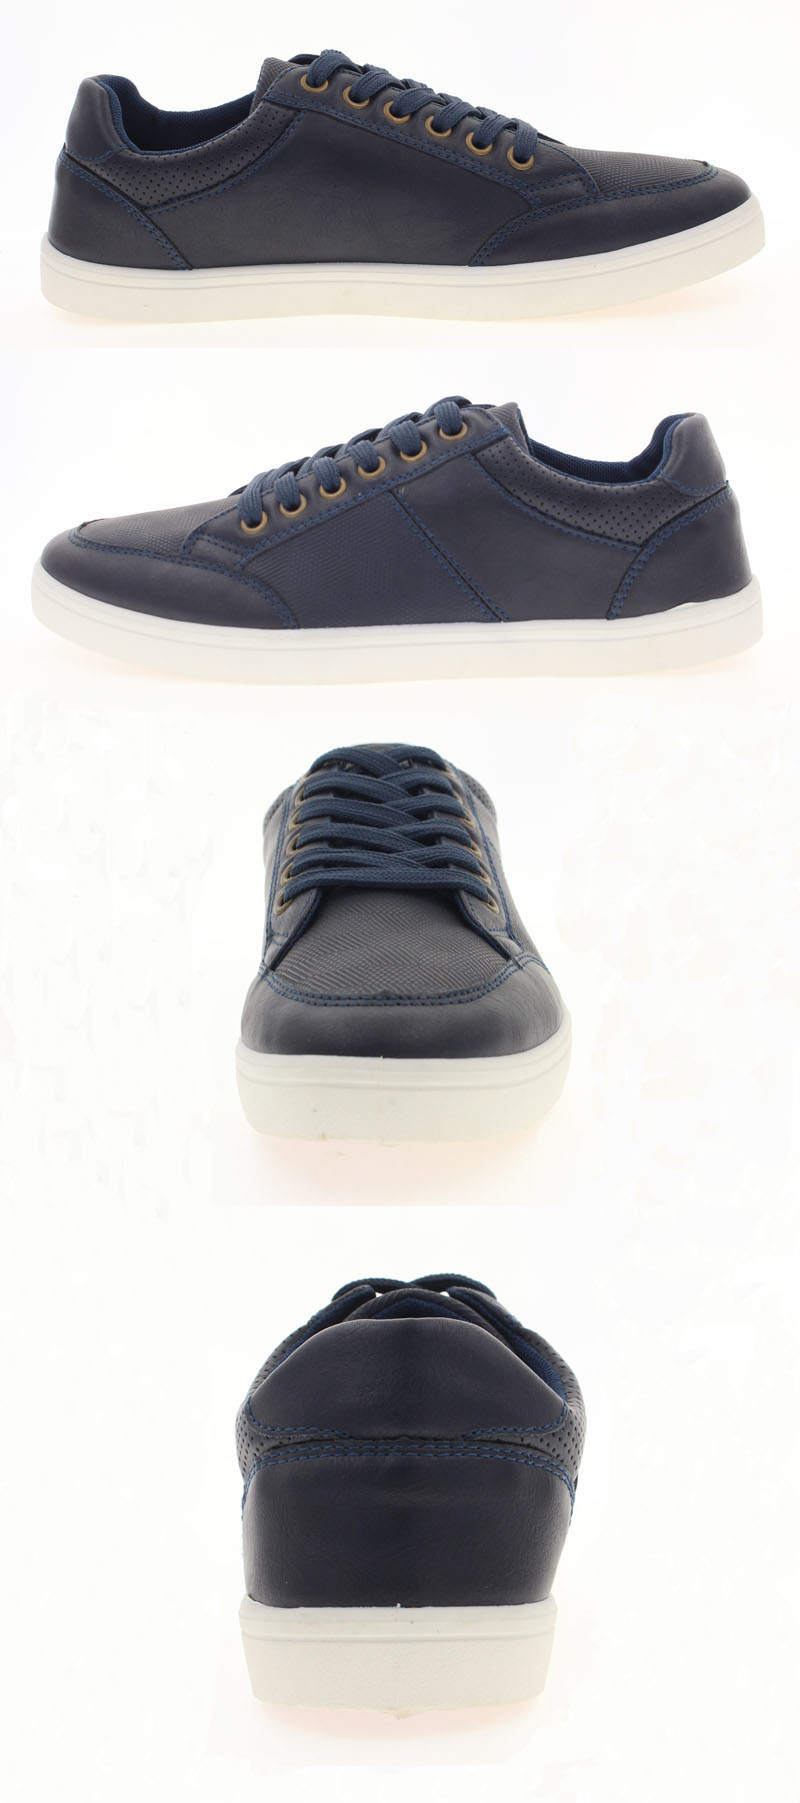 Navy casual shoes for men